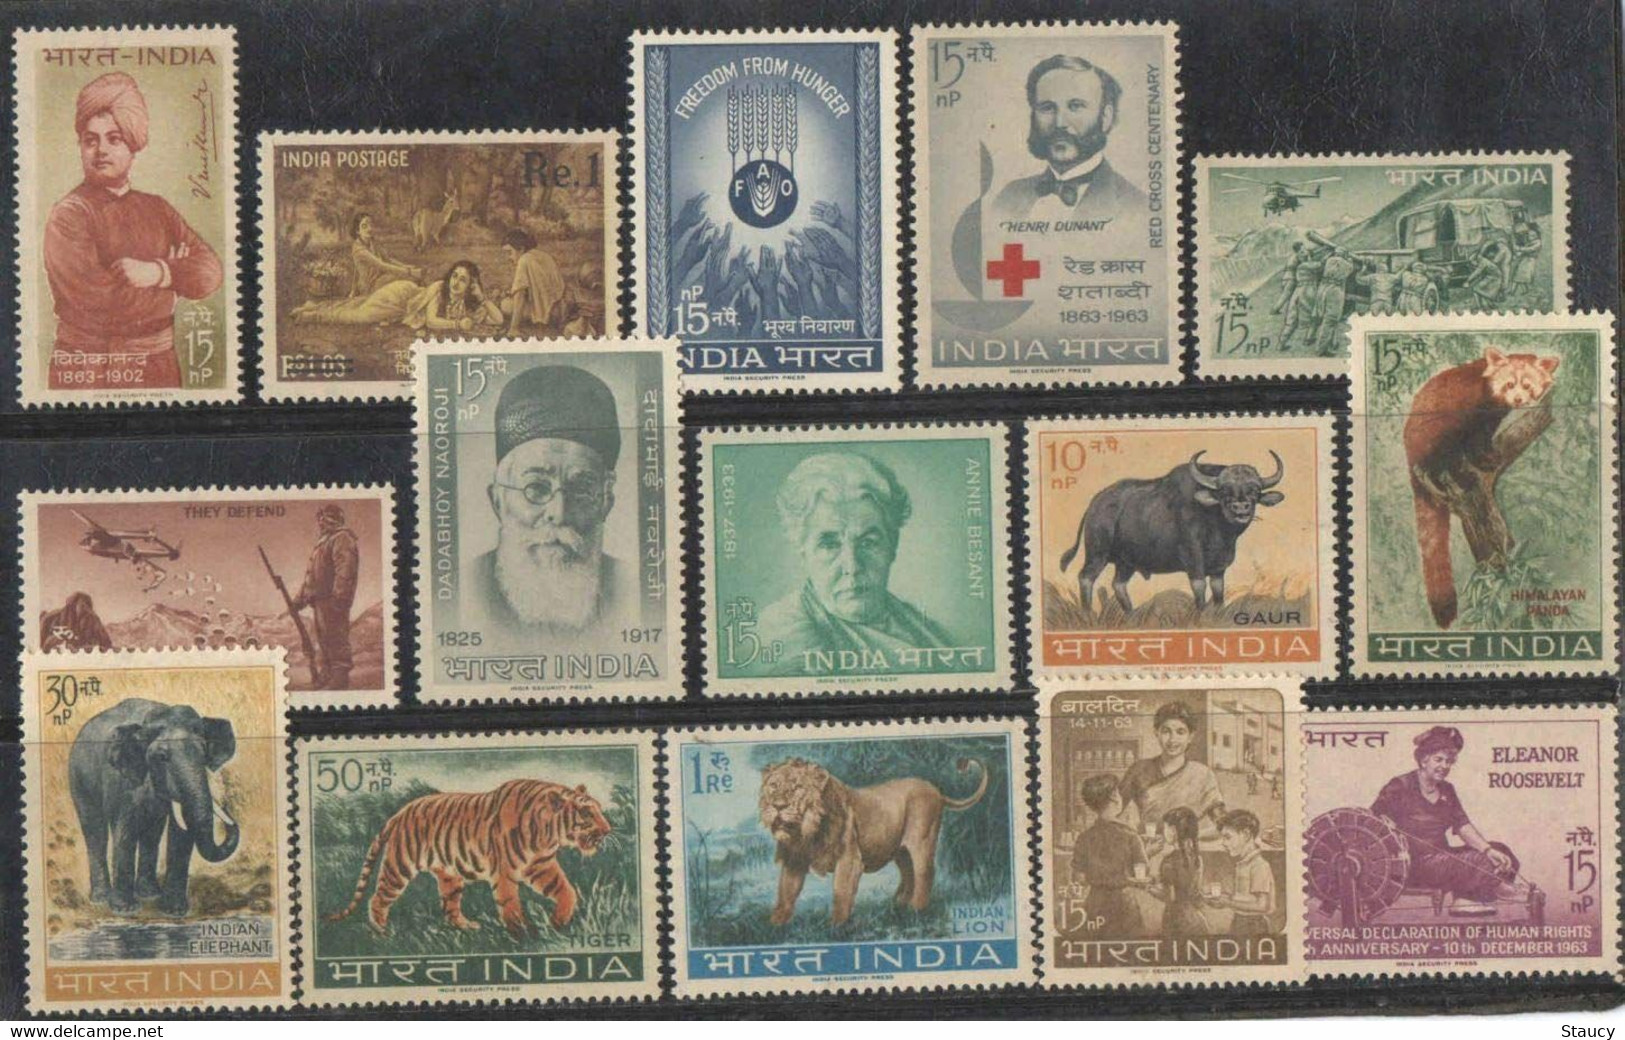 India 1963 Complete Year Pack / Set / Collection Total 15 Stamps (No Missing) MNH As Per Scan - Neufs